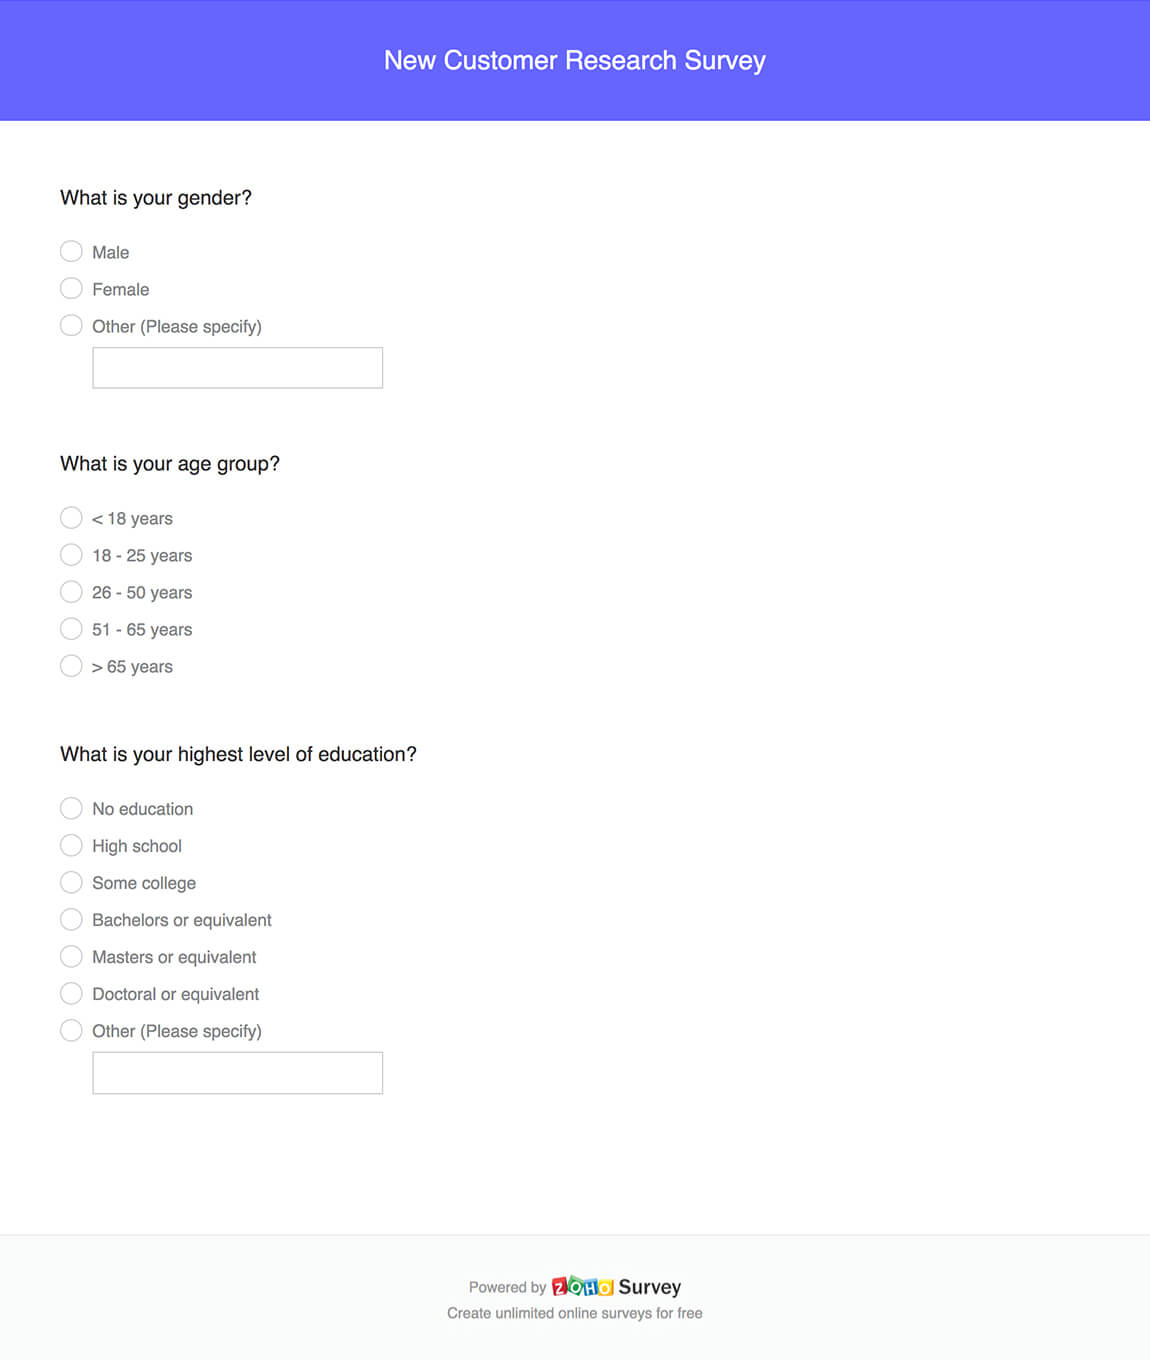 New customer research survey questionnaire template